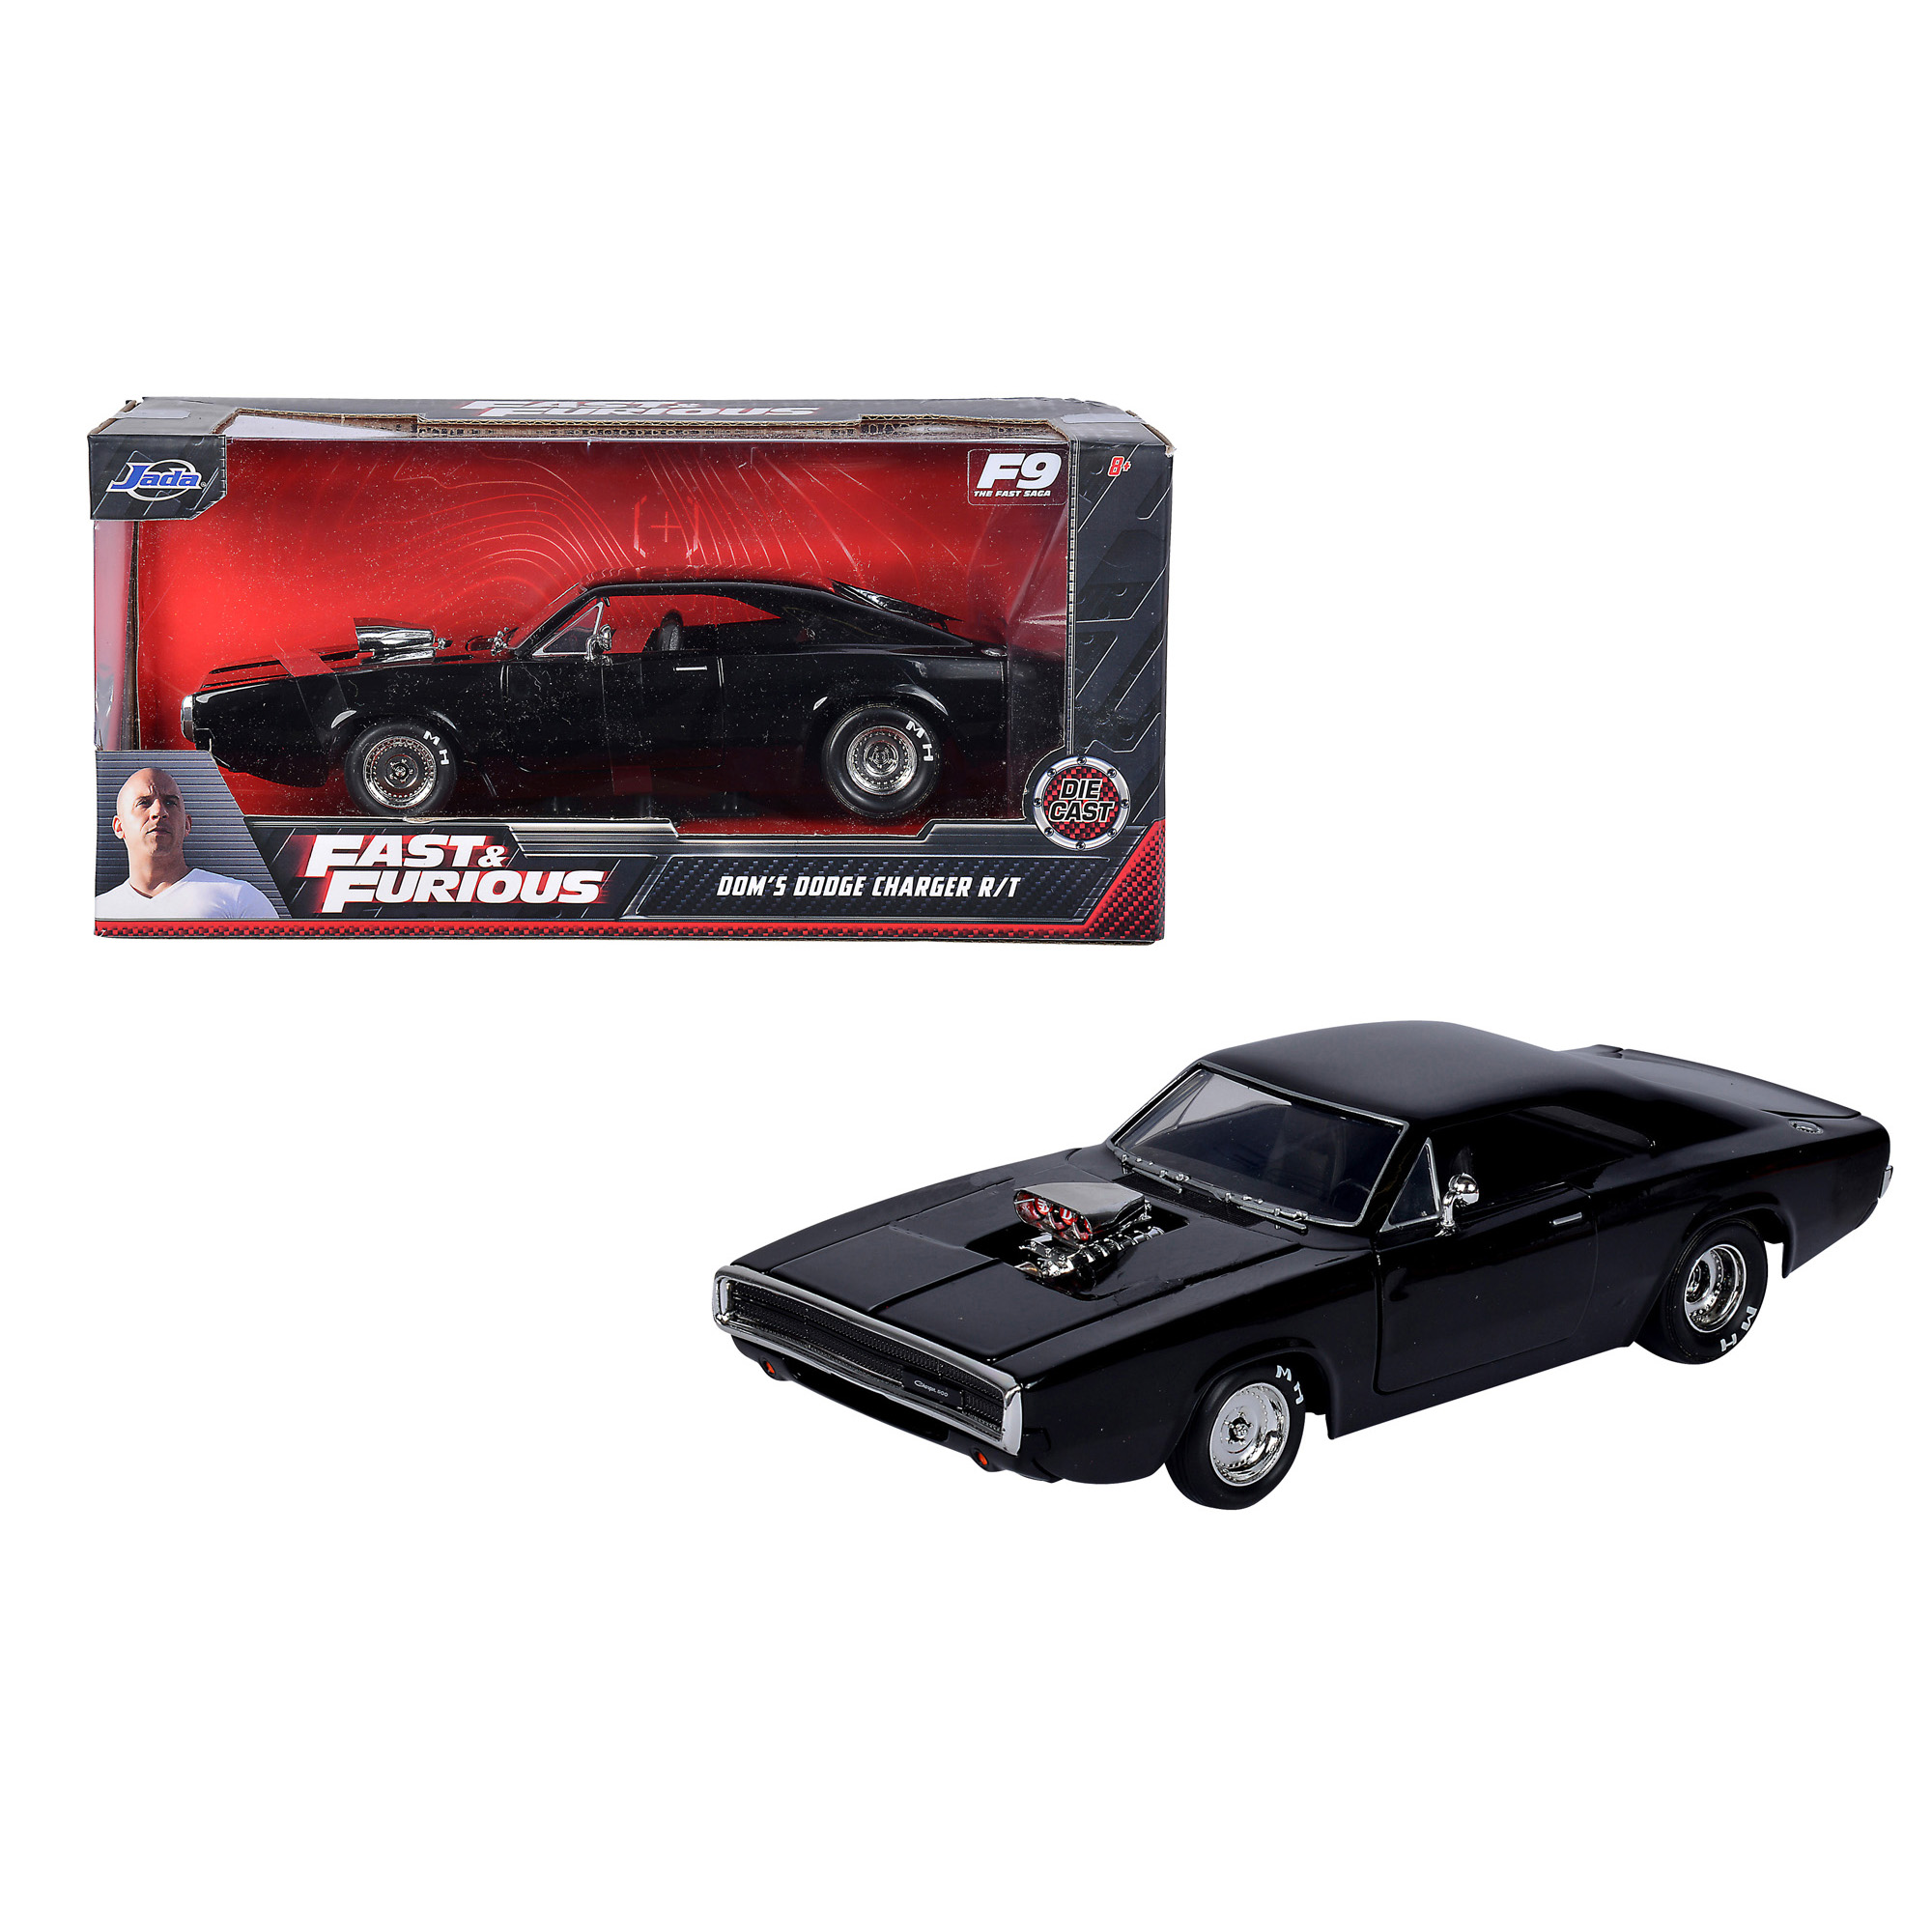 Dodge charger 1327 fast & furious scala 1:24 in Vendita Online